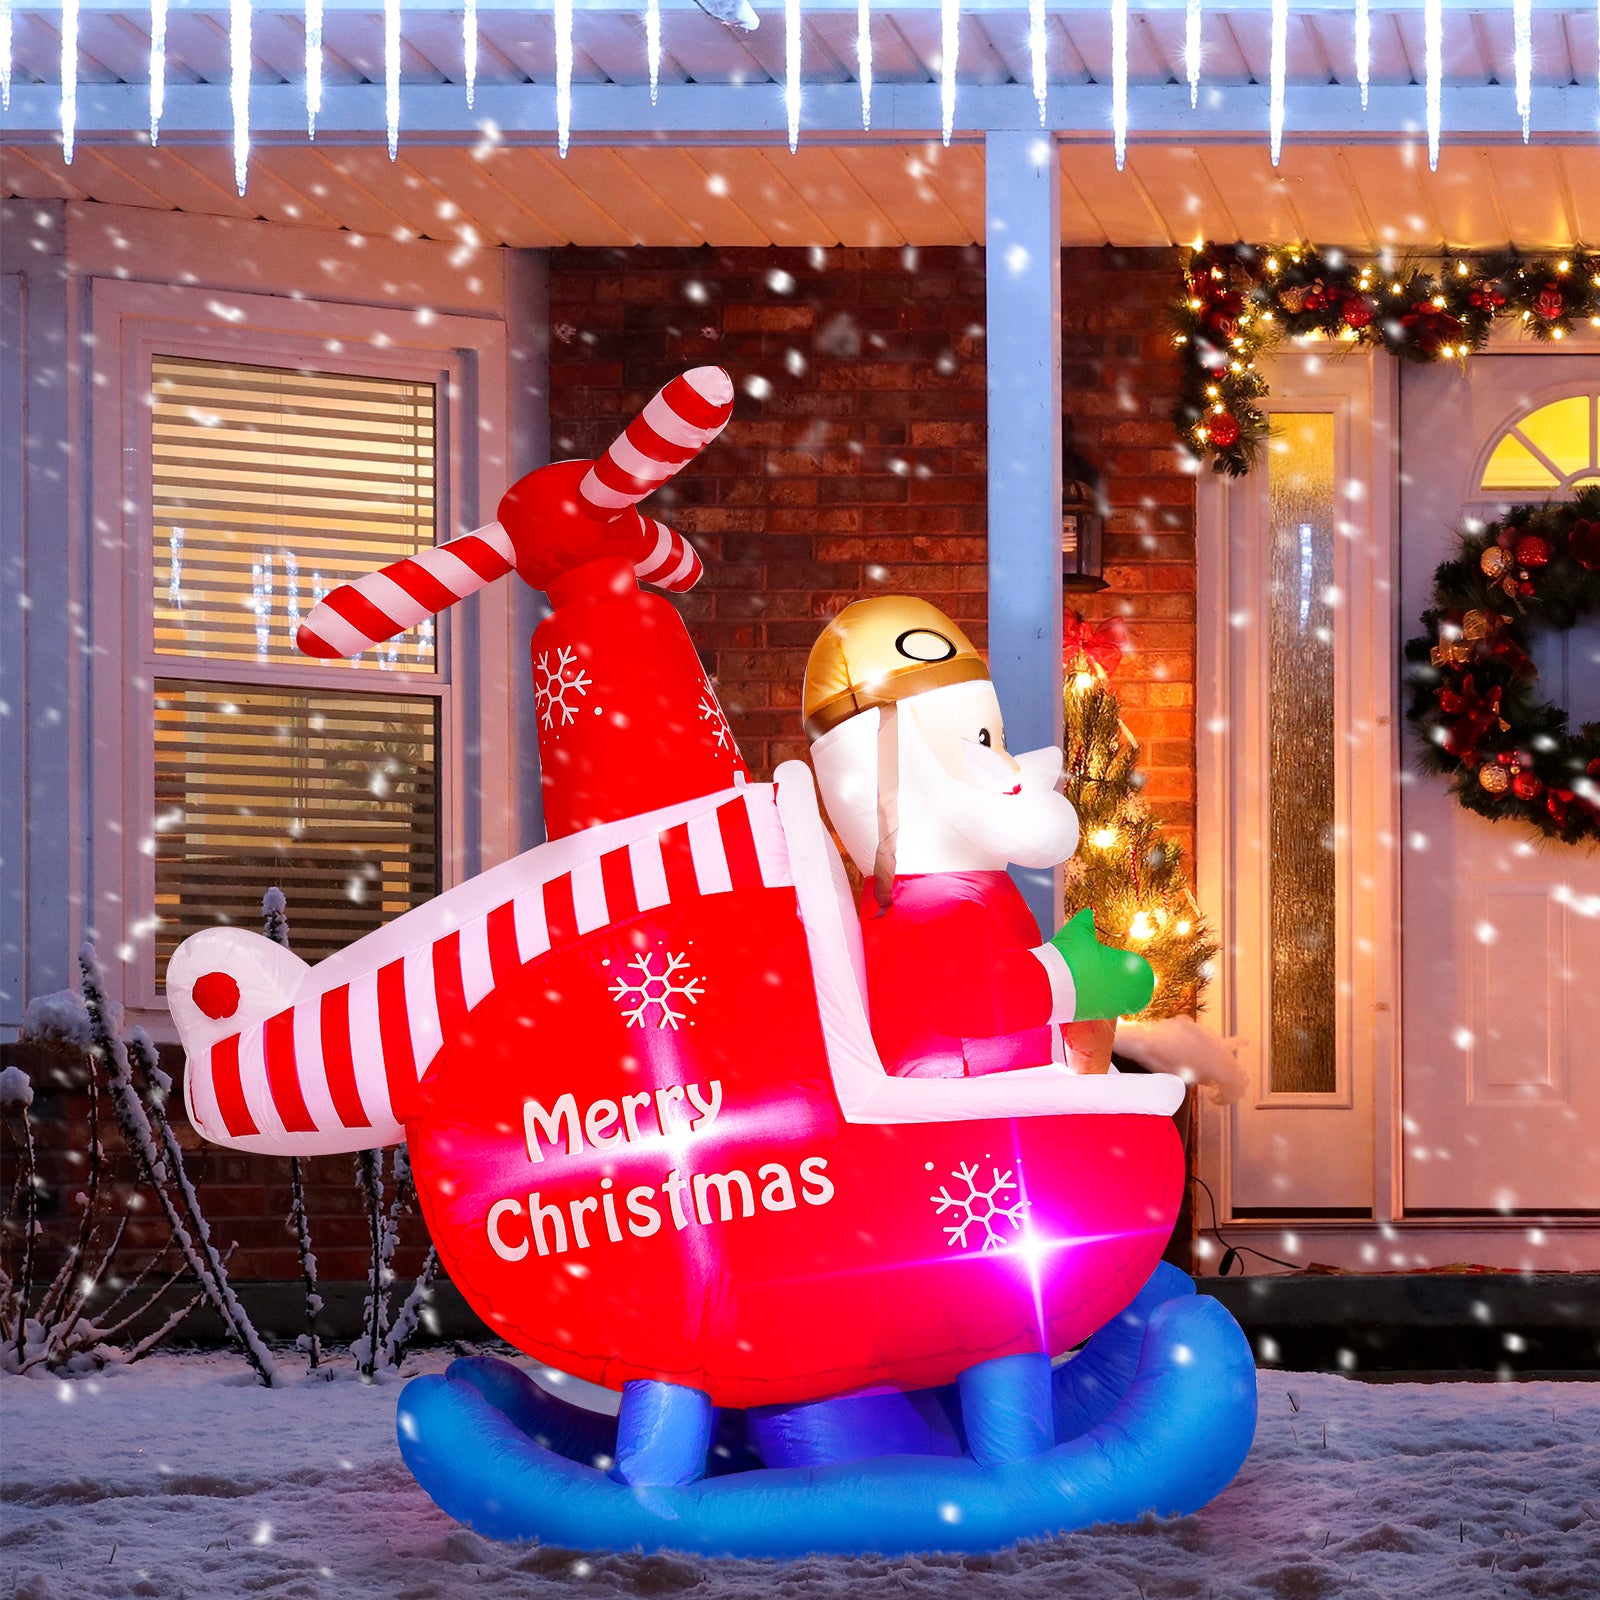 6FT Christmas Decorations Inflatable Santa, Built-in LED Outdoor Indoor Yard Lighted for Holiday Season,Quick Air Blown Santa w/Helicopter